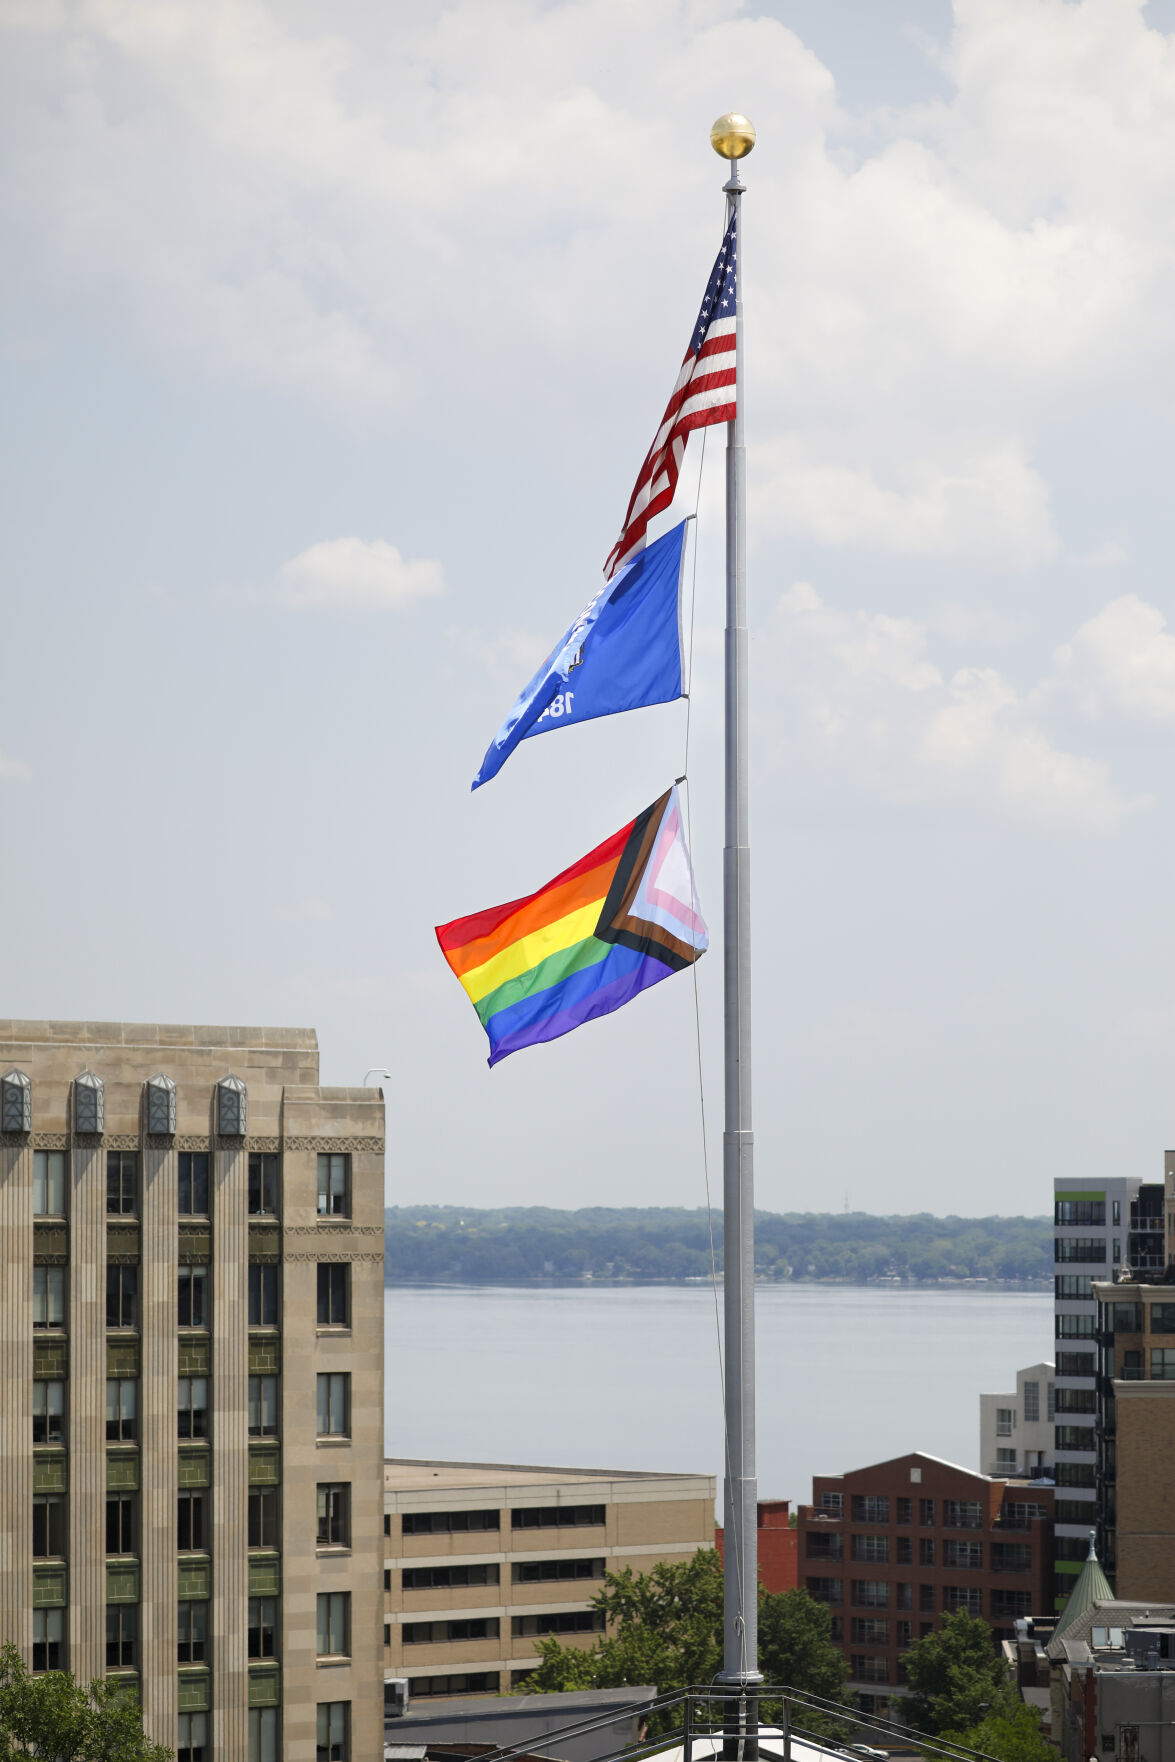 U.S. Embassies Permitted to Raise Pride Flags - The New York Times